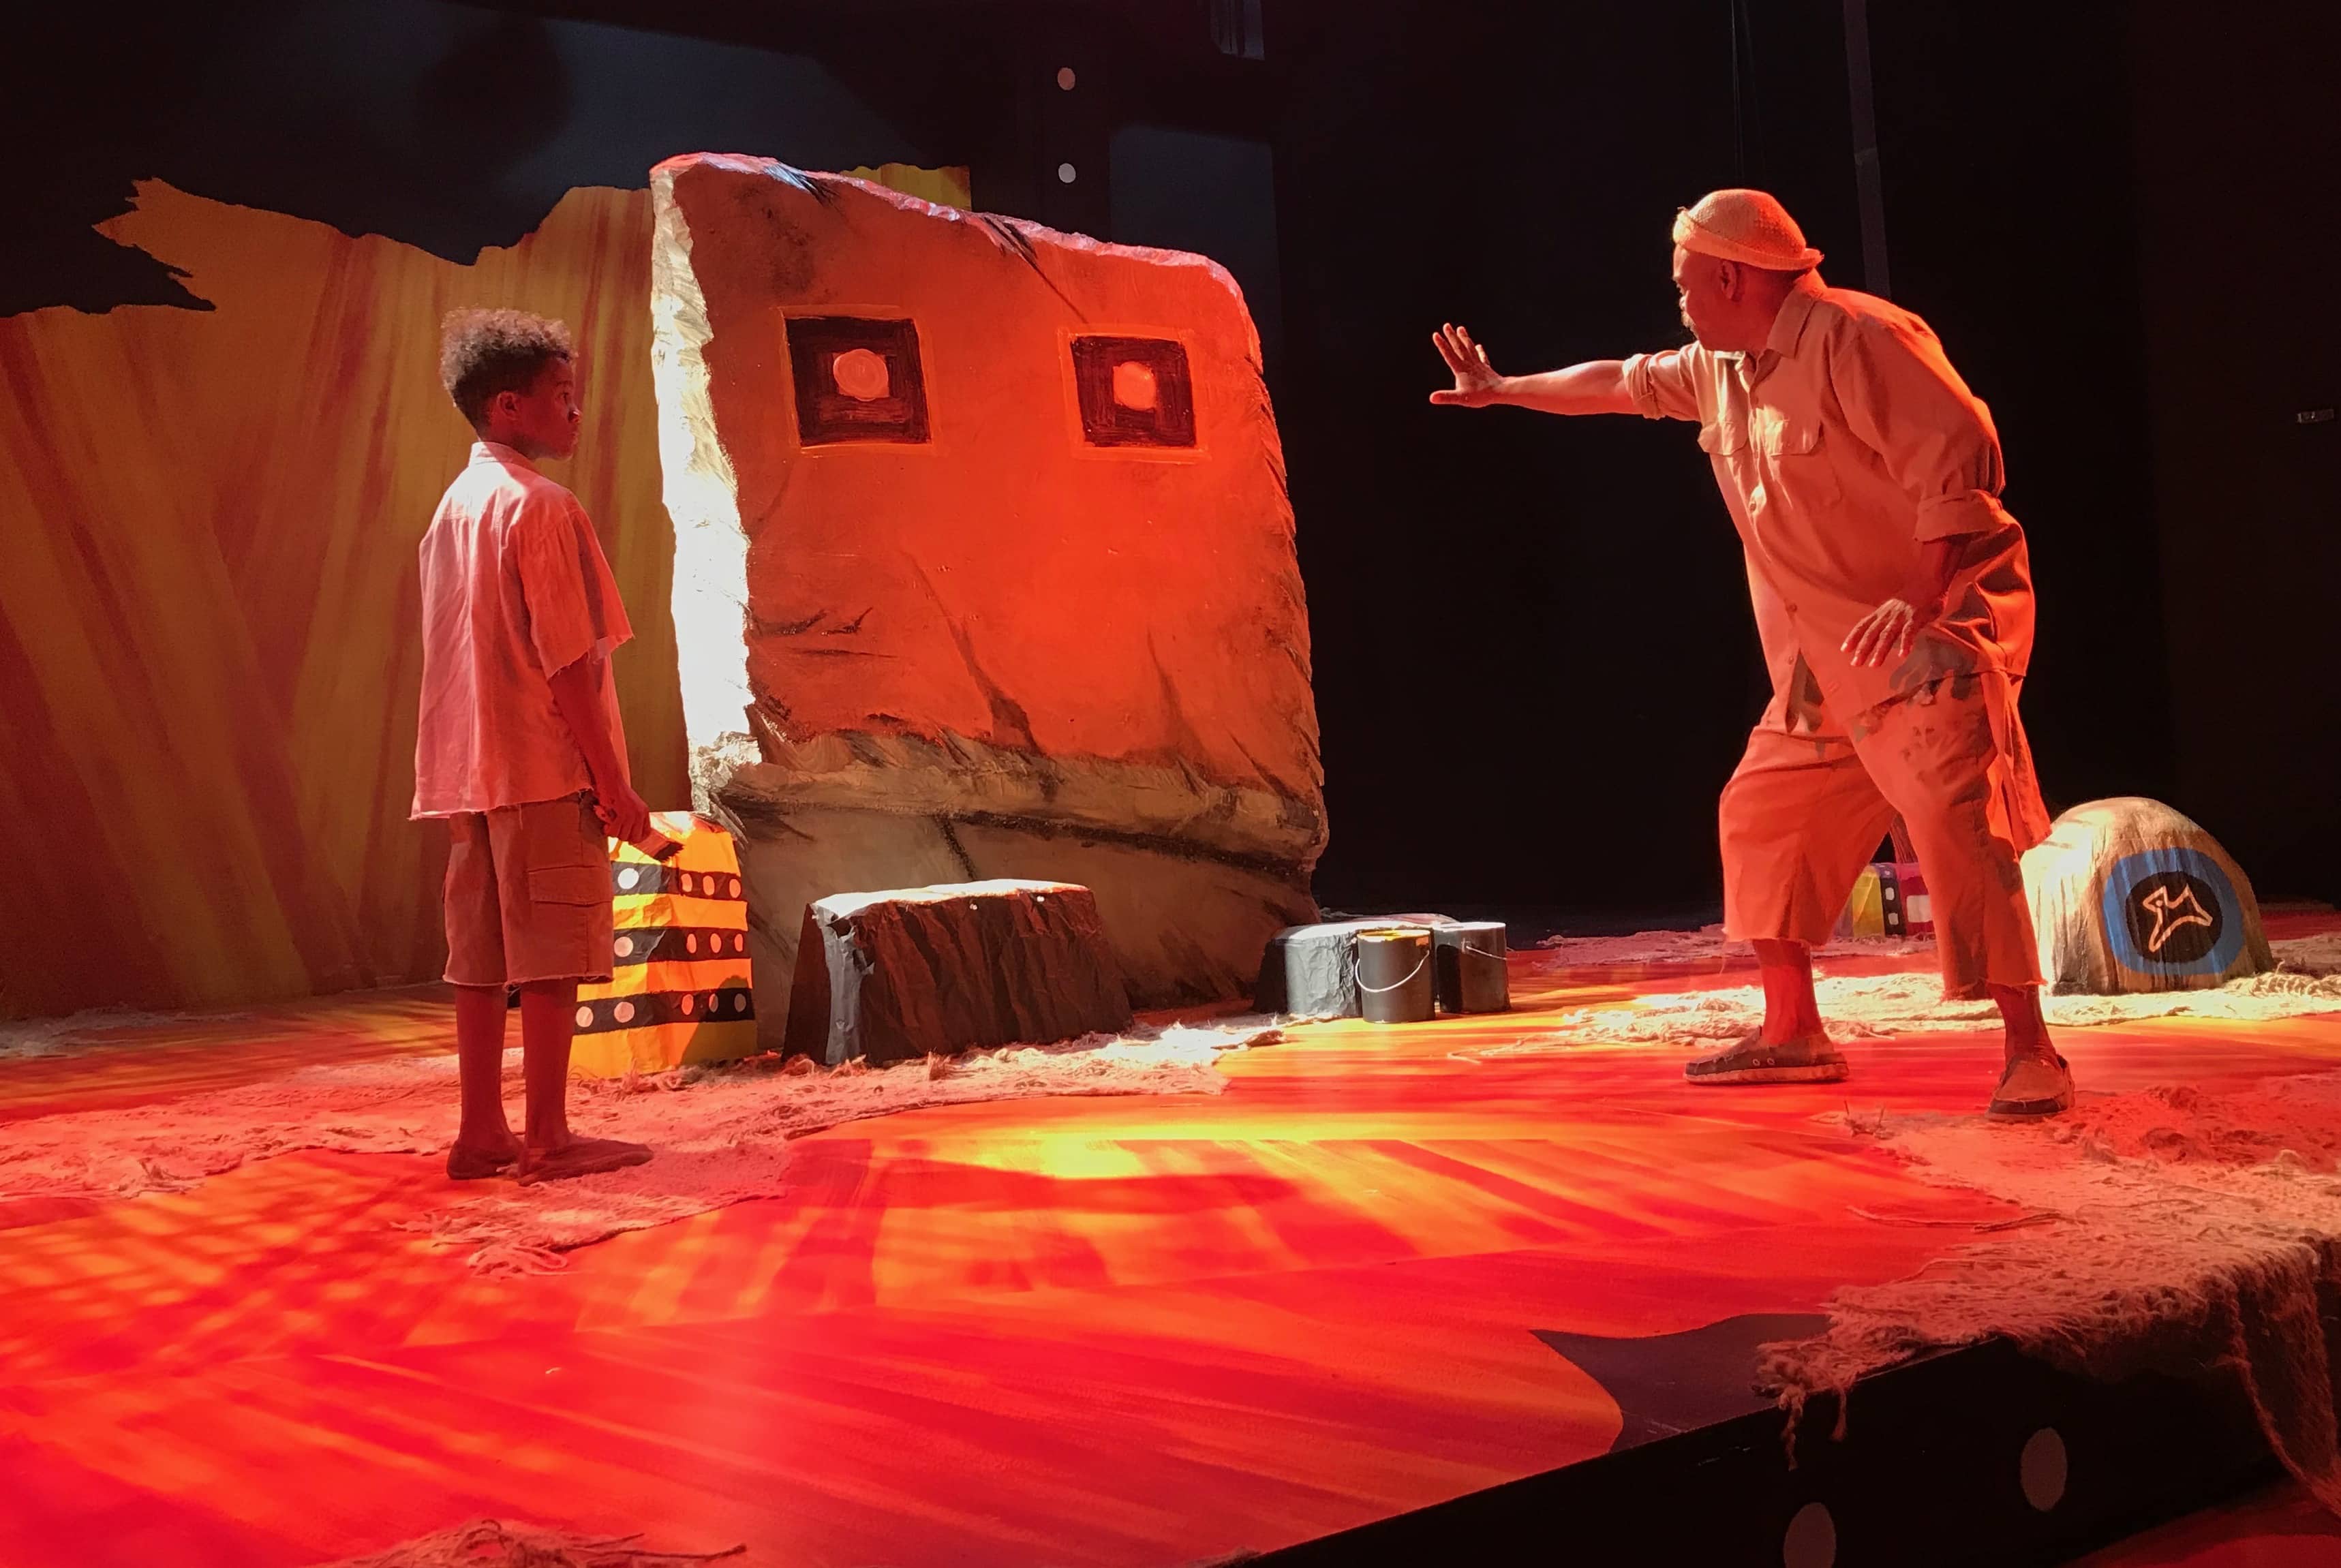 The Painted Rocks at Revolver Creek opens this weekend at MetroStage. Photo courtesy of MetroStage.